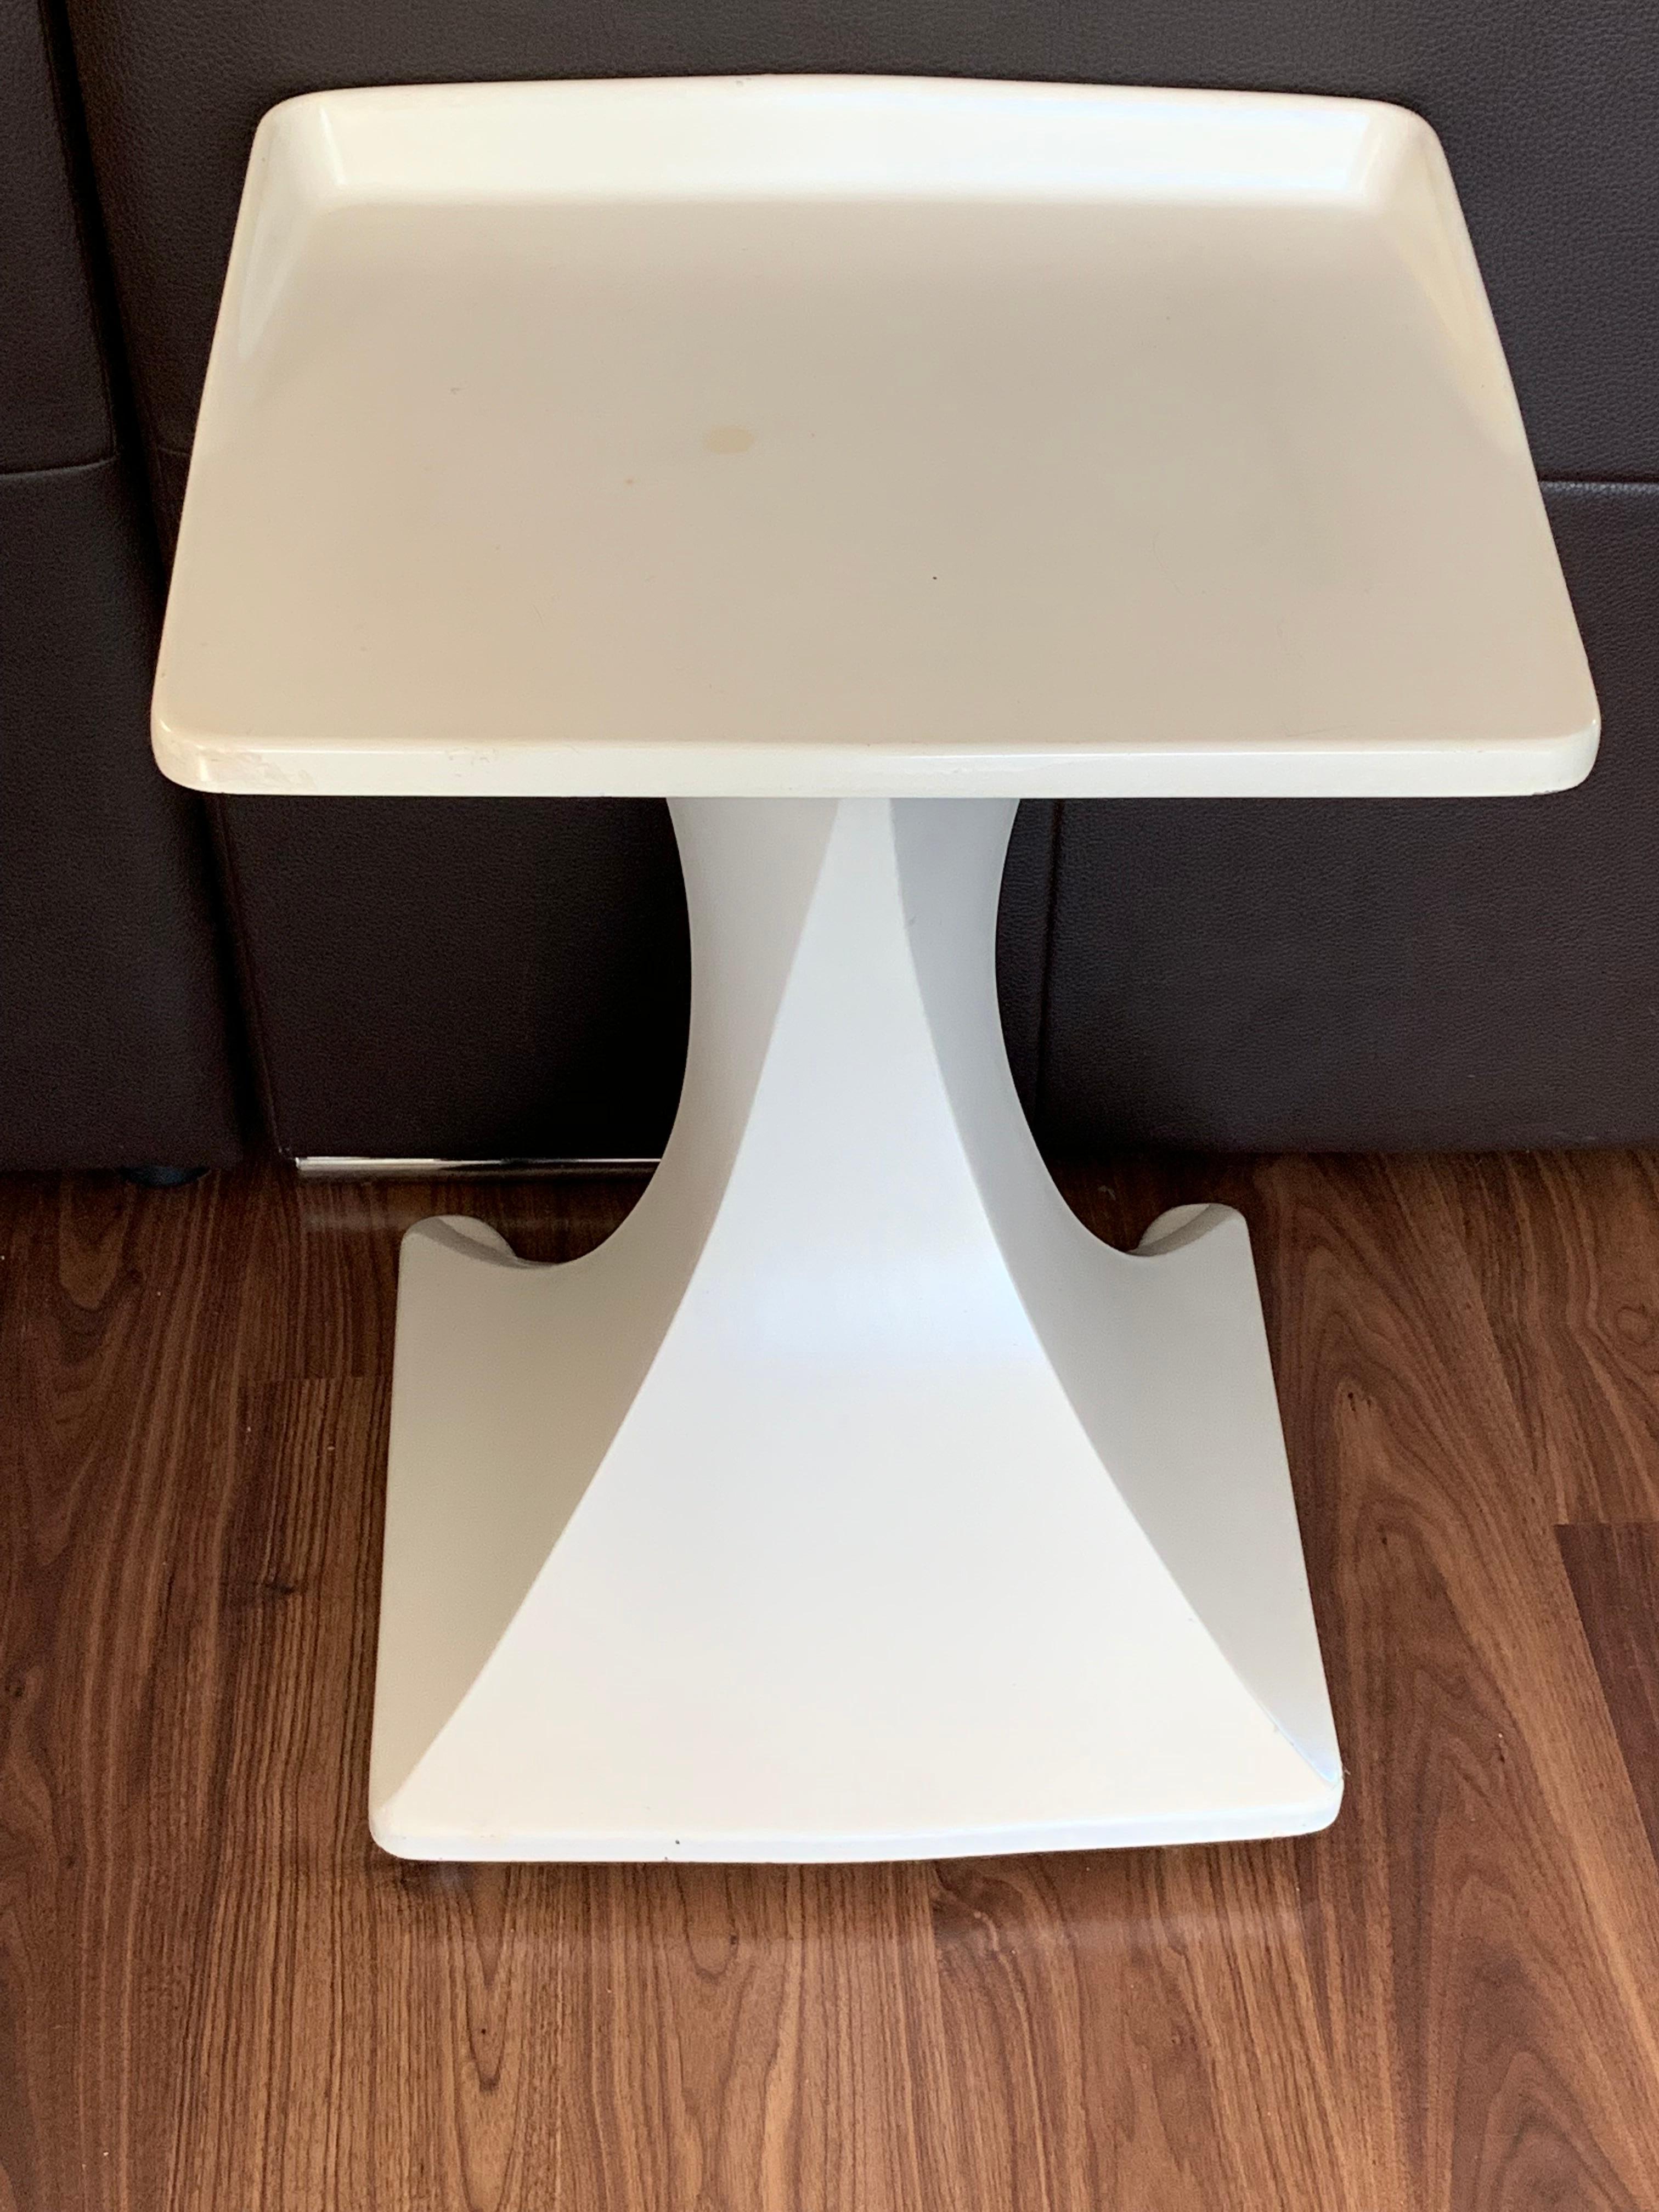 Italian midcentury pedestal side table in antique white with wheels
Coffee table or TV stand with wheels manufactured in Italy in the 1970s. It features a white lacquered fiberglass structure with metal and plastic wheels.